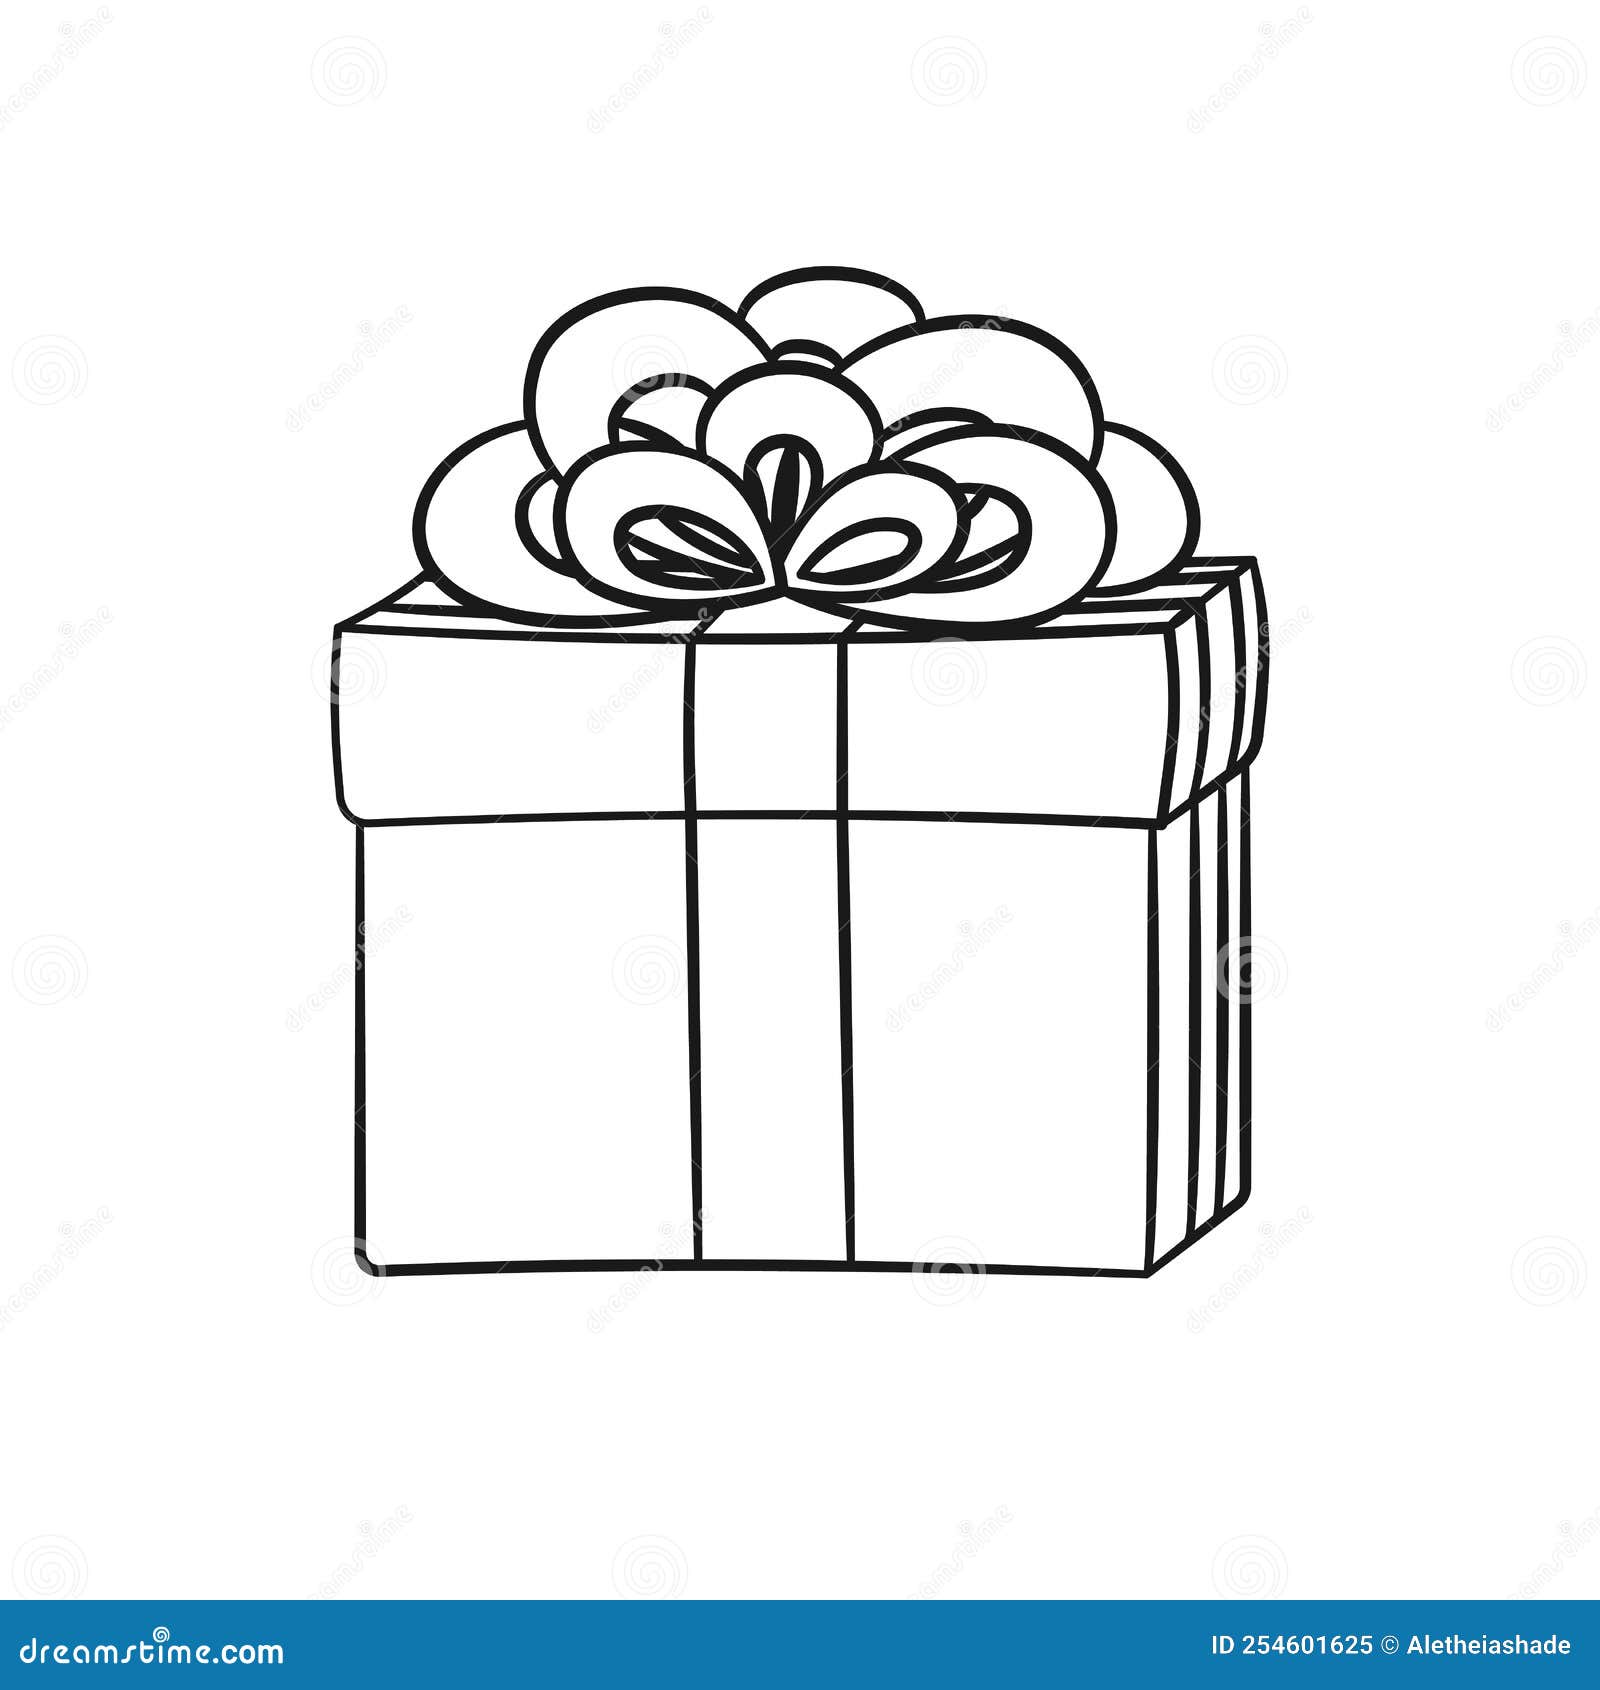 https://thumbs.dreamstime.com/z/gift-box-bow-cartoon-christmas-birthday-present-illustration-outline-coloring-book-page-printable-activity-worksheet-254601625.jpg